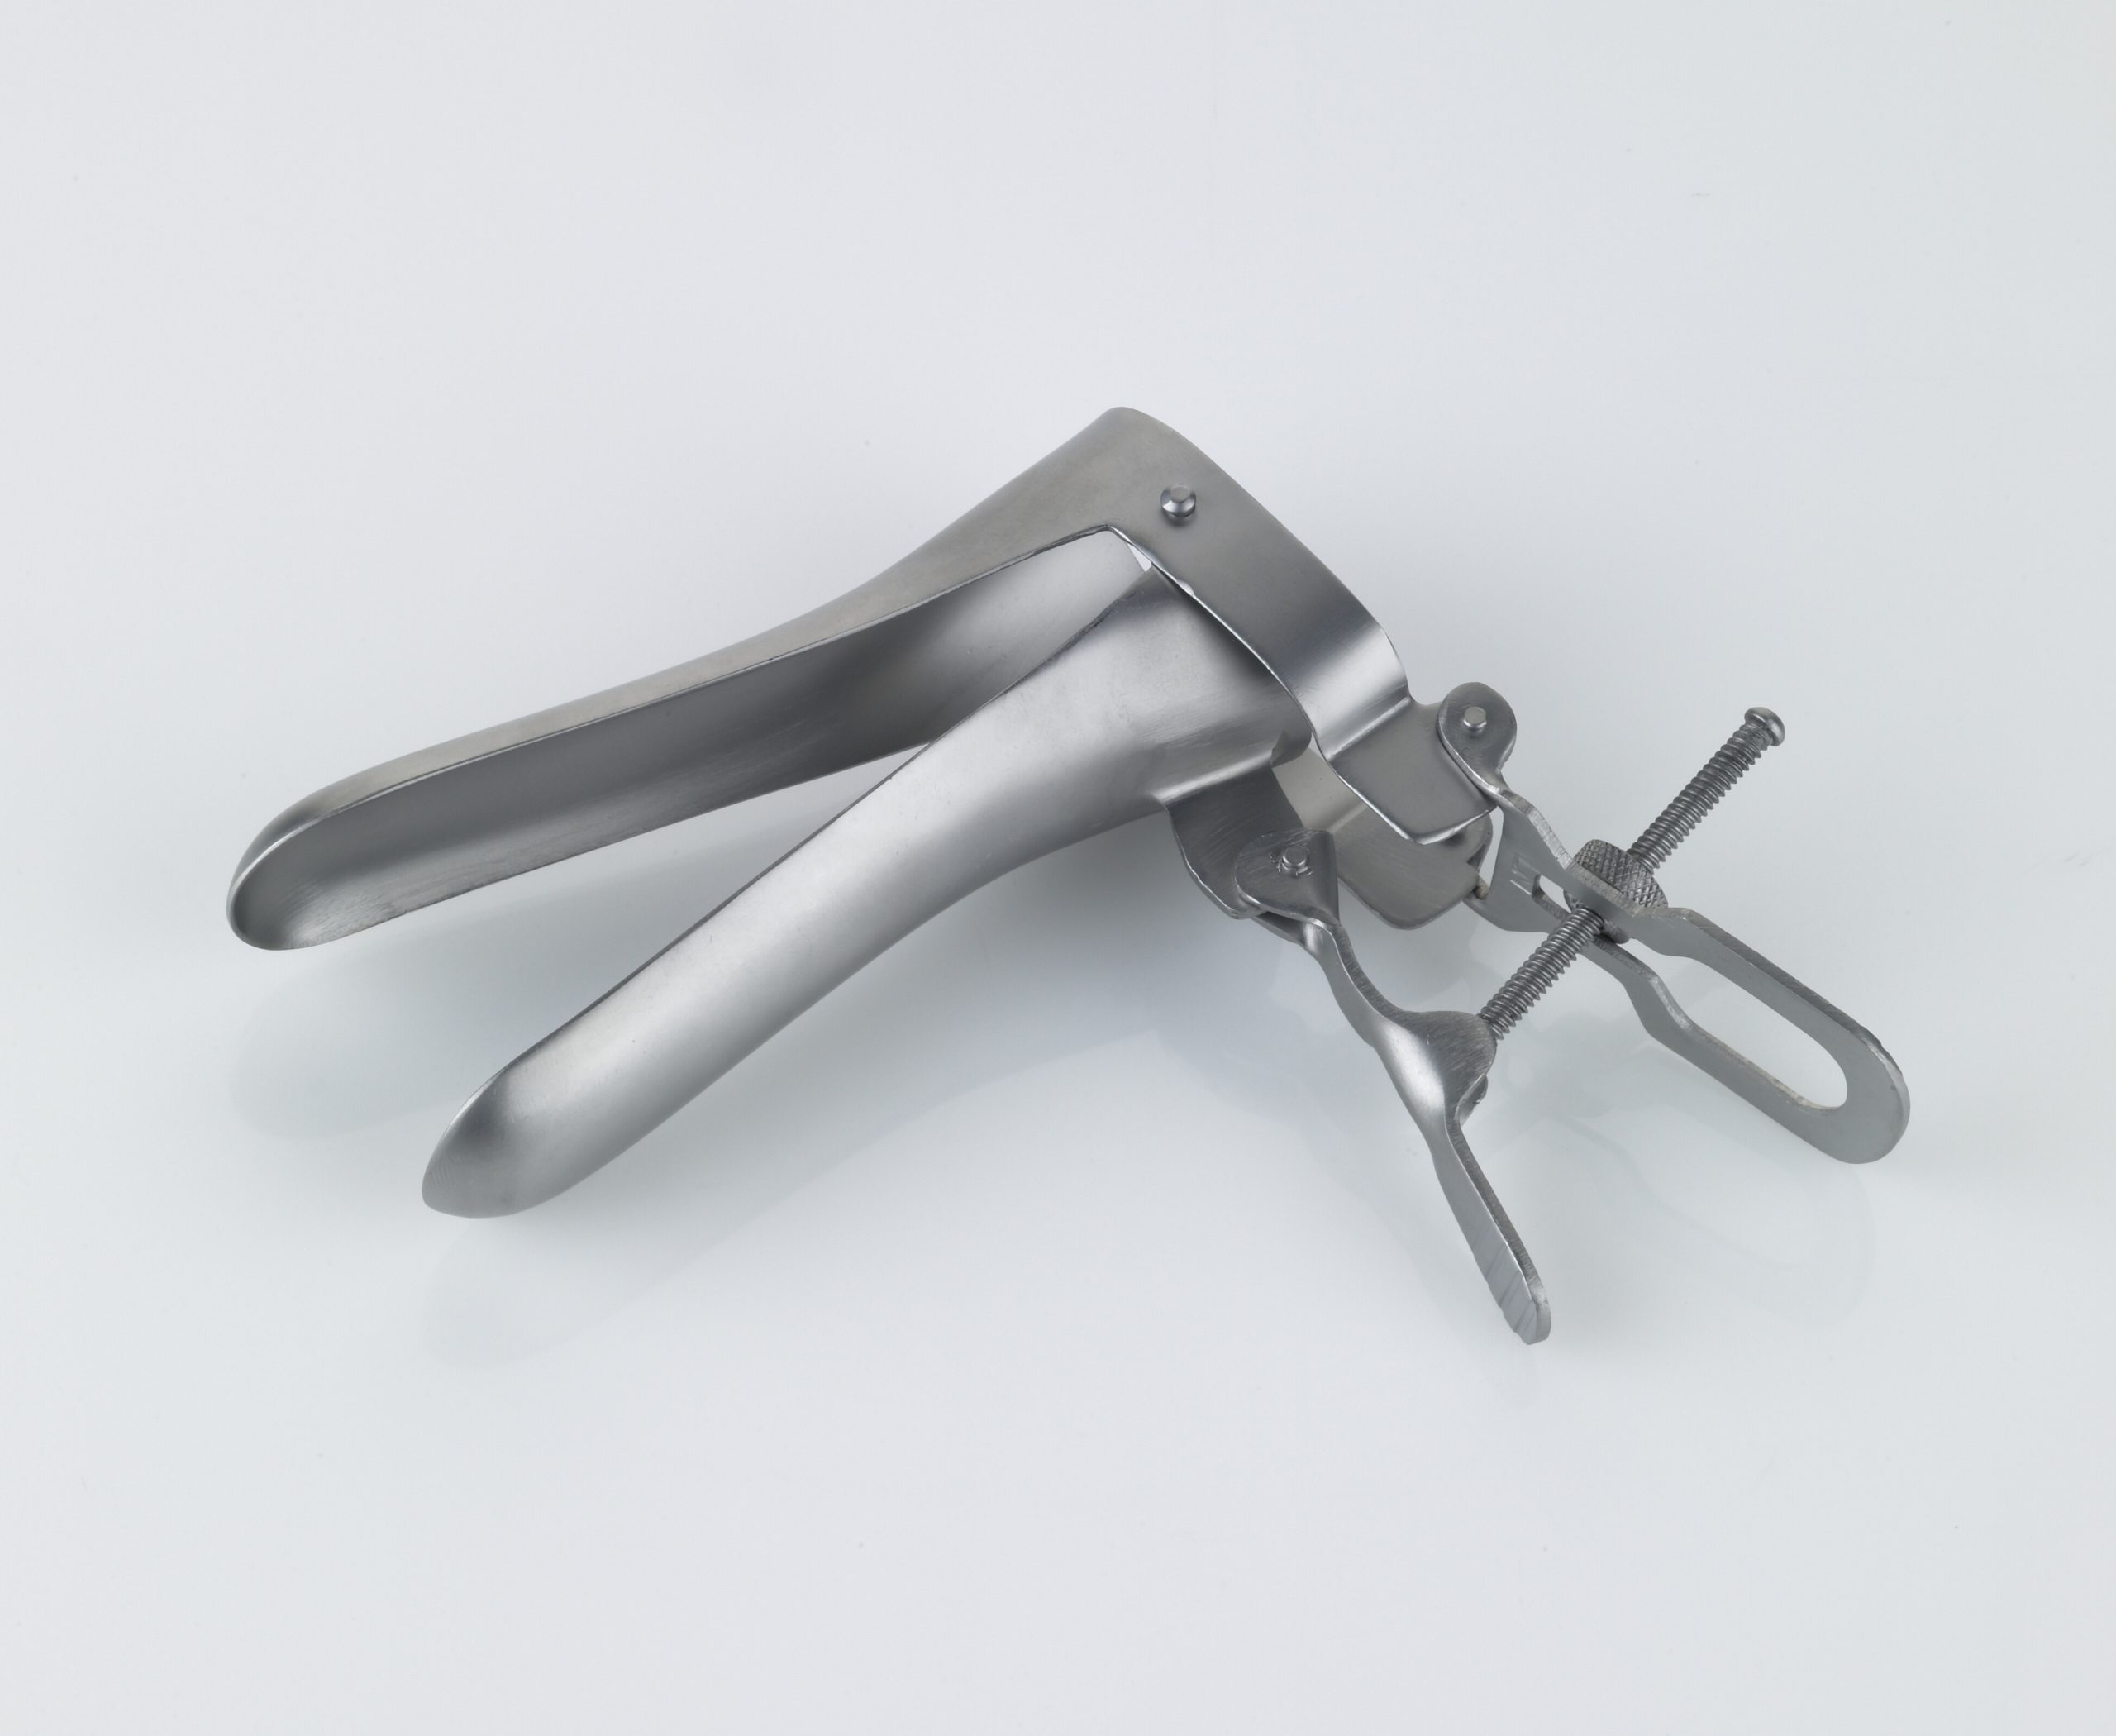 Sims Vaginal Speculum Small Bailey Instruments